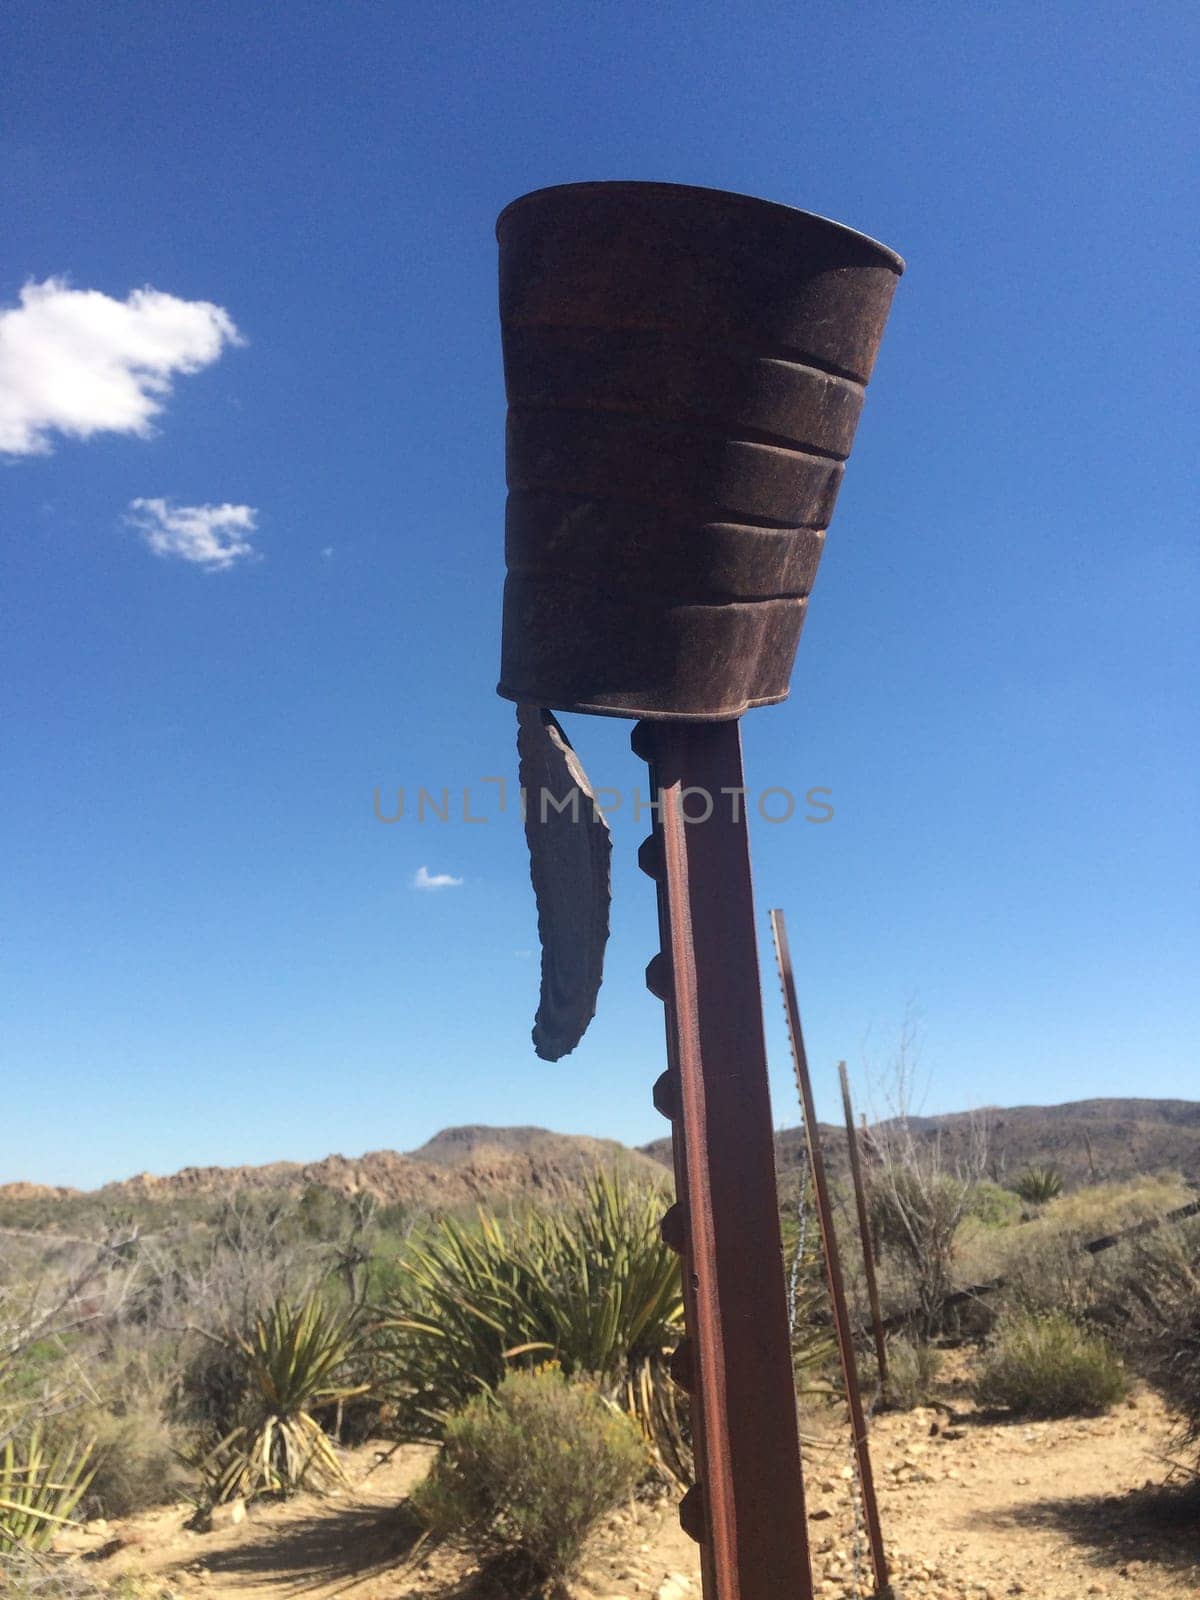 Rusty Old Can Upside Down on Post in Desert . High quality photo